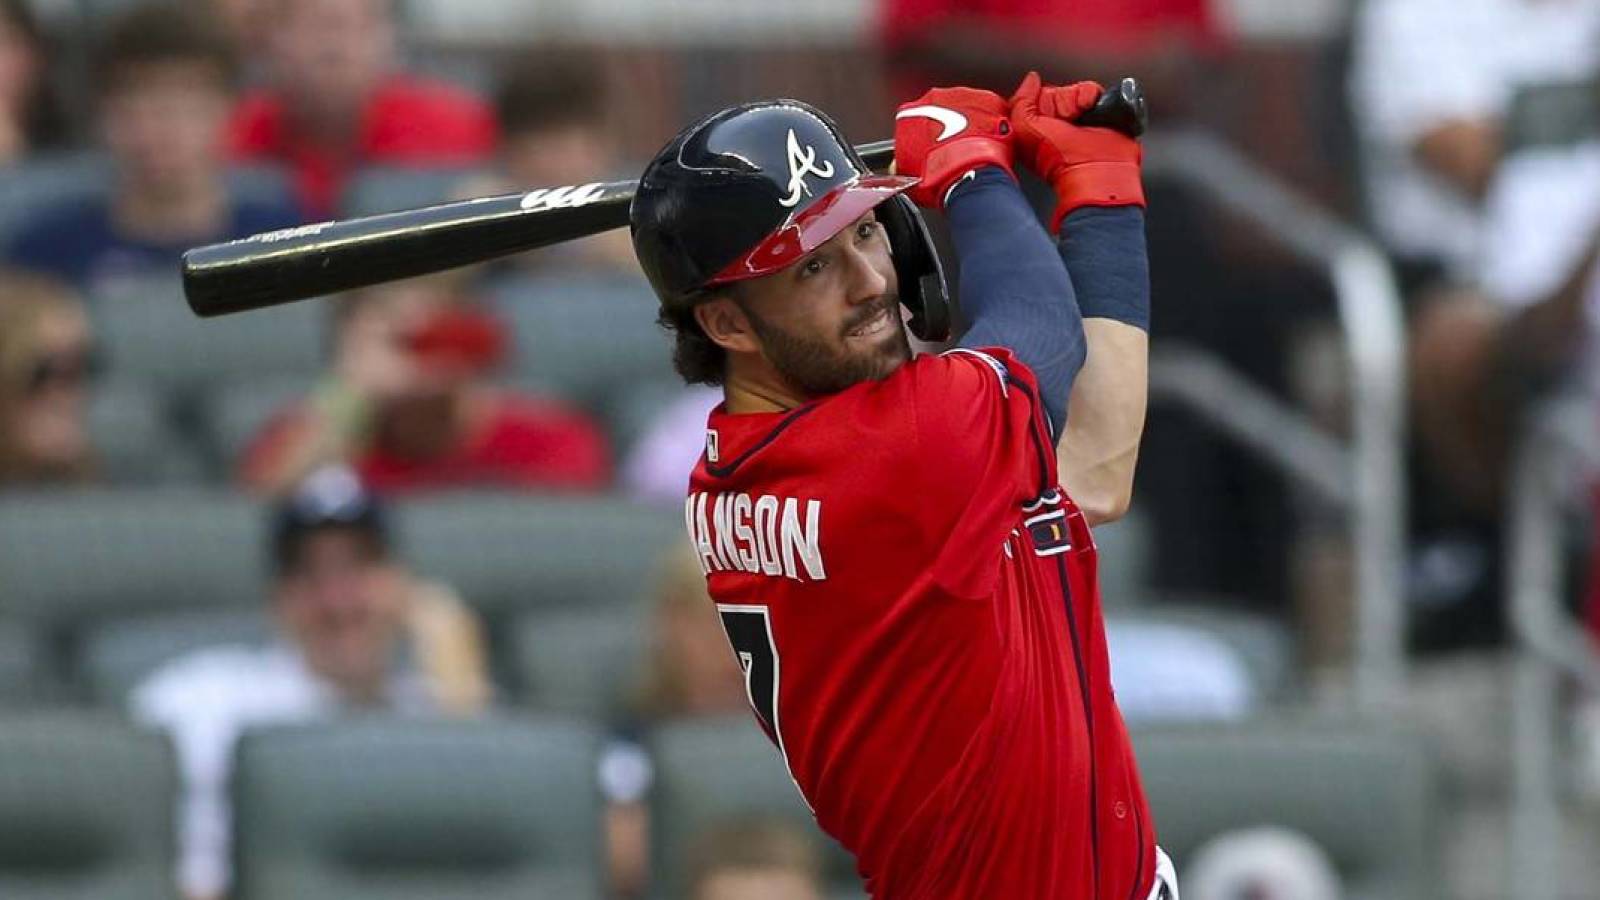 mancandy kings; — The thrilling saga of DANSBY SWANSON and his